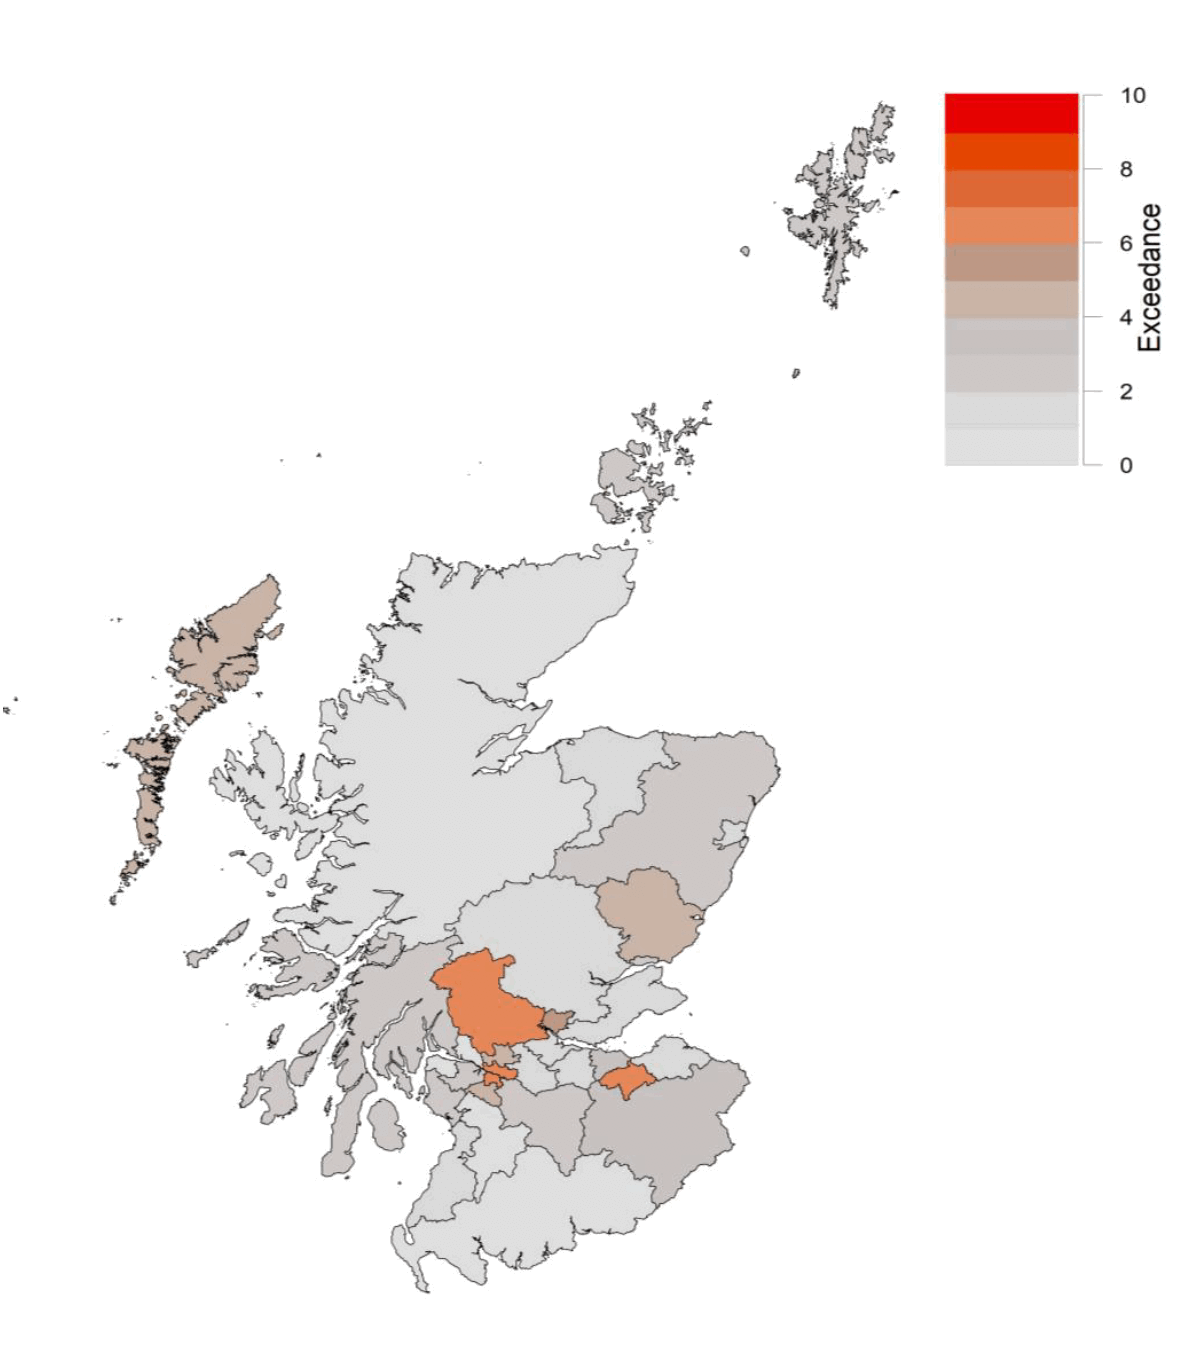 Figure 7 is a colour coded map showing cumulative weekly exceedance for local authority areas in Scotland. The colours range from light grey (exceedance = 0) to red (exceedance = 10). East Renfrewshire, Glasgow, Midlothian and Stirling are all coloured dark orange.